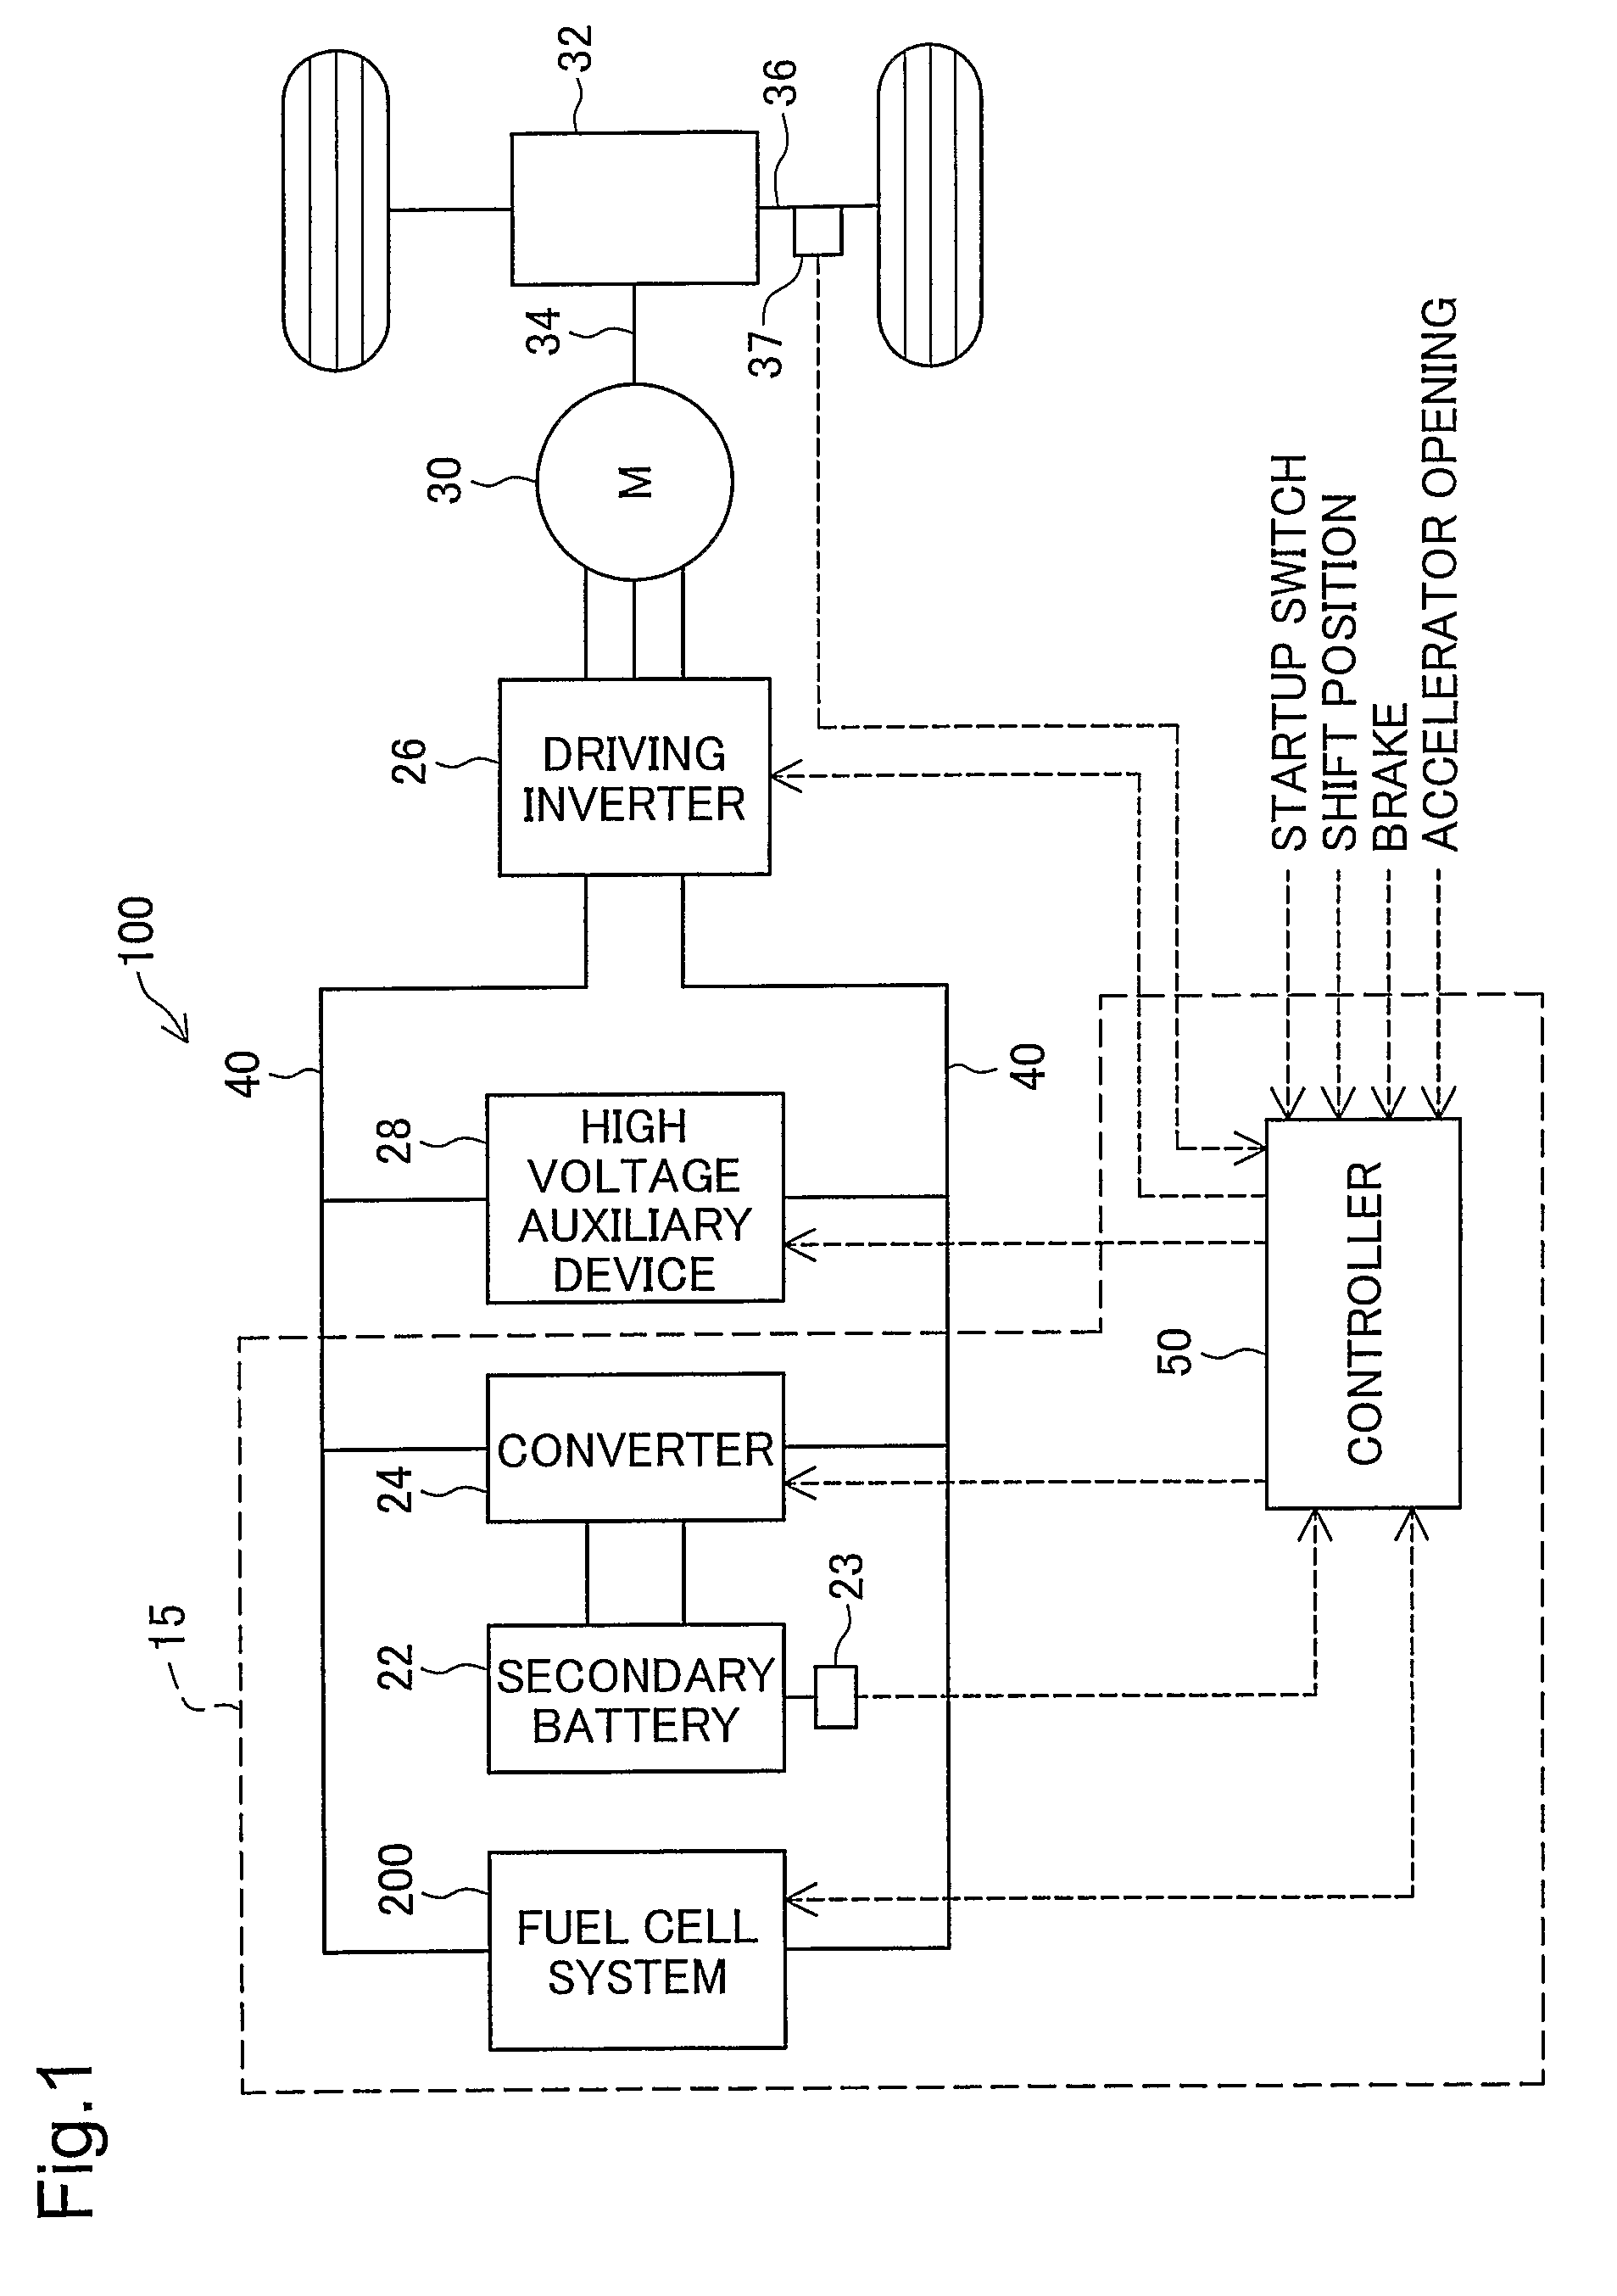 Fuel cell system for preventing hydrogen permeable metal layer degradation